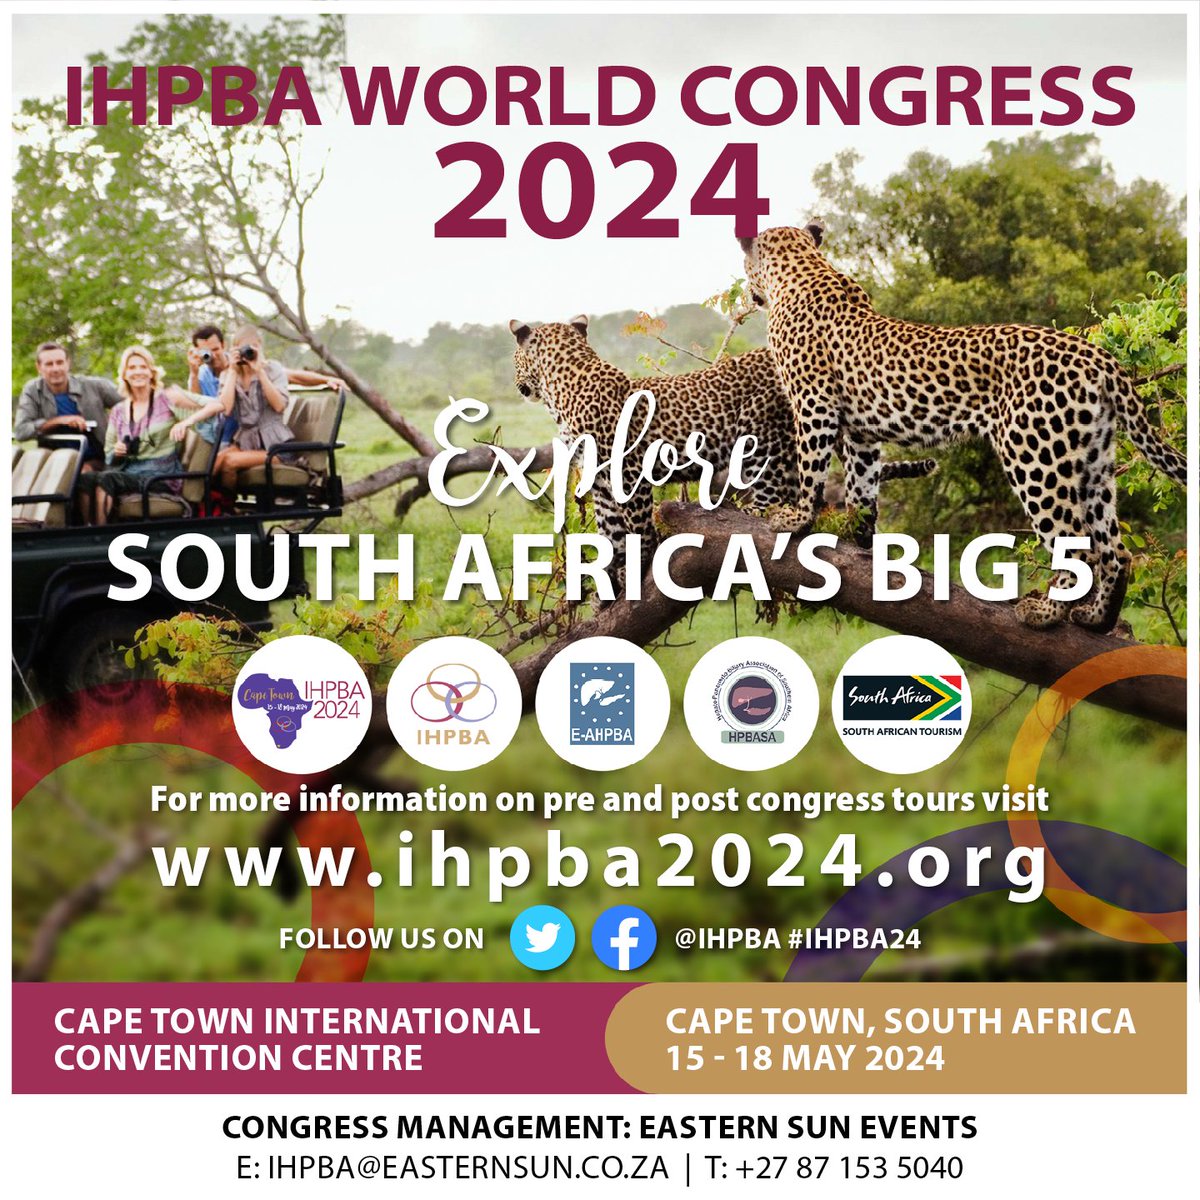 Experience the opportunities for exploration at the IHPBA World Congress in 2024, set to take place in Cape Town, South Africa. Visit our Pre and Post Congress Tours page on ihpba2024.org for more information #IHPBA2024 @EAHPBA @AHPBA